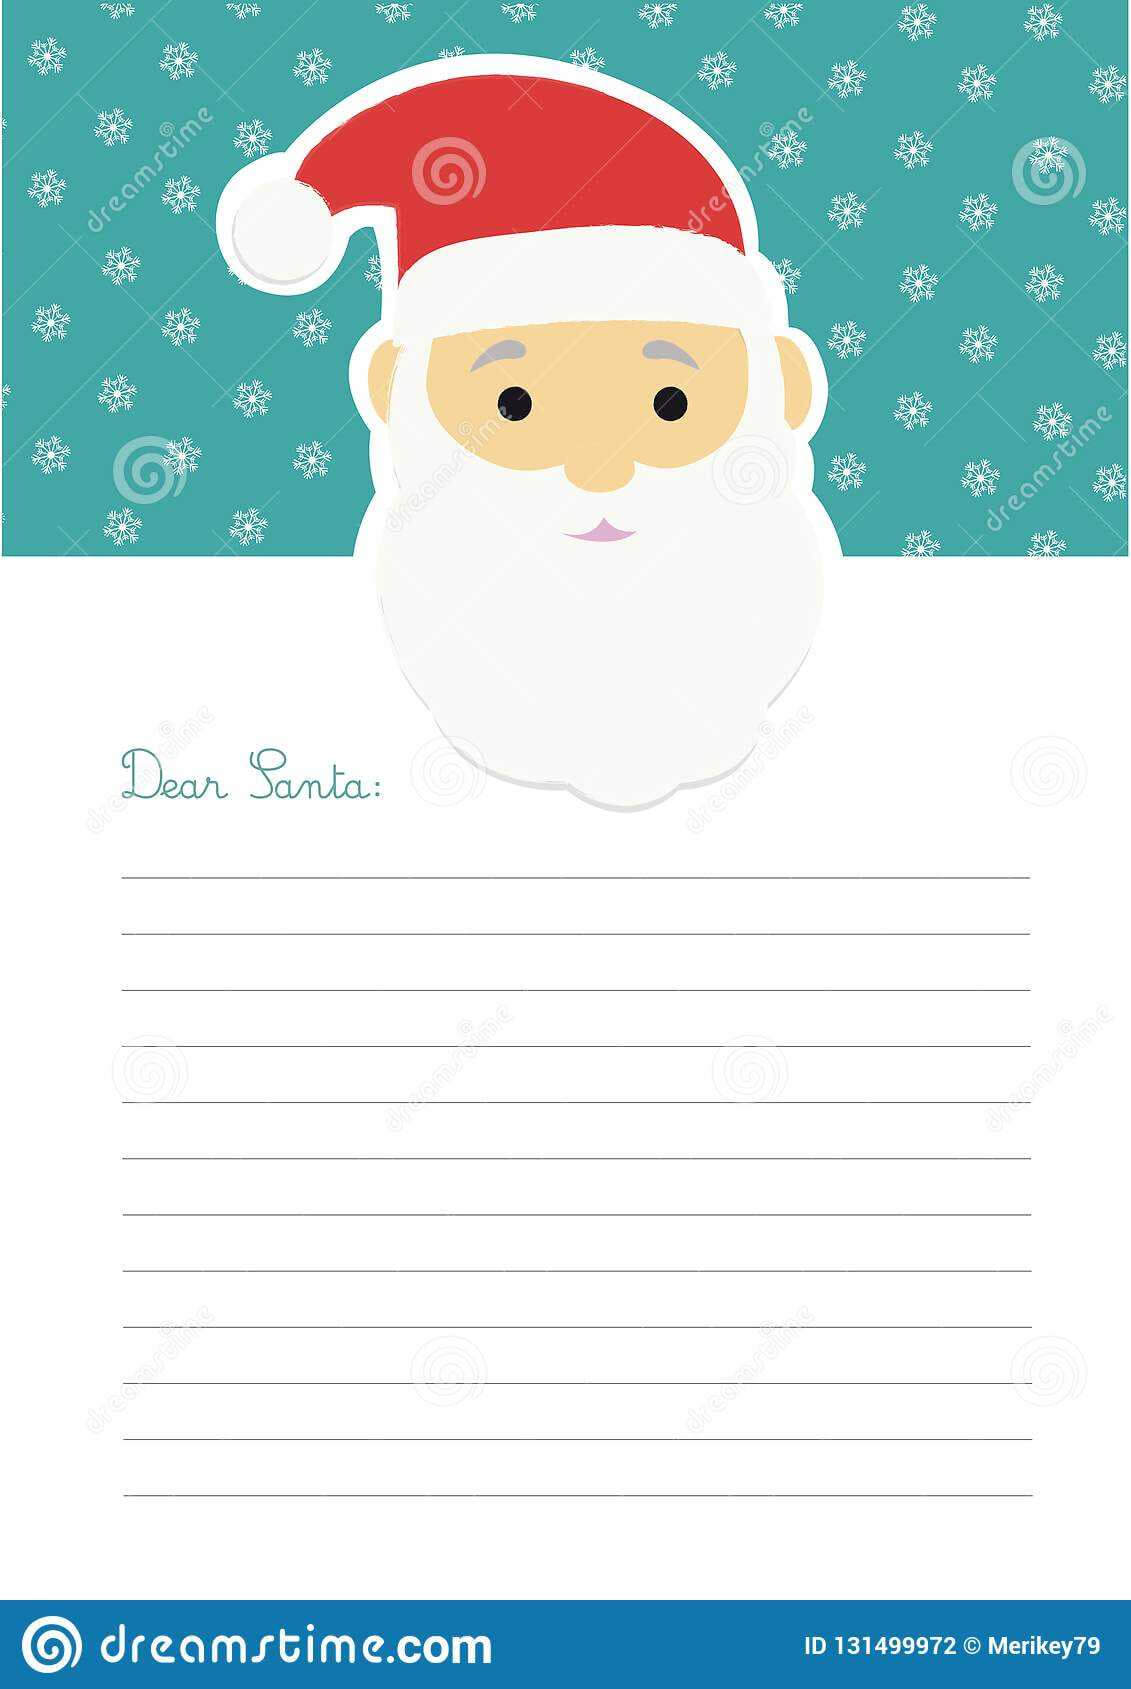 017 Blank Letter From Santa Template Free Ideas Send Letters For Blank Letter From Santa Template